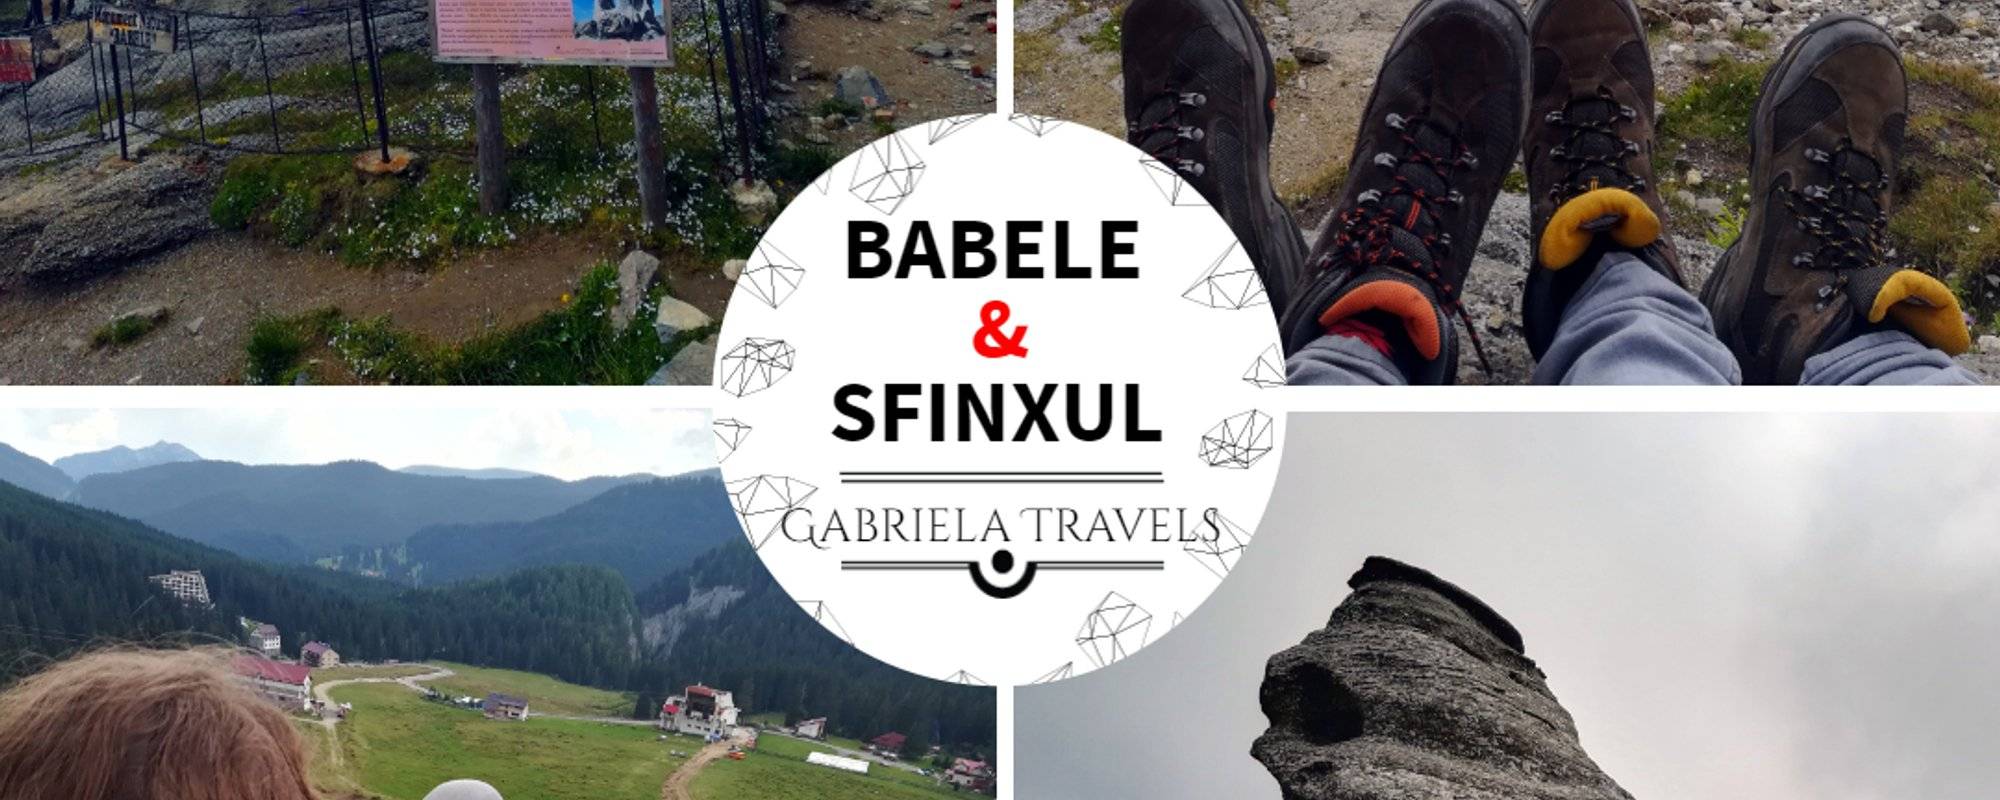 Let's travel together #113 - Babele & Sfinxul (The Old Women & The Sphinx)